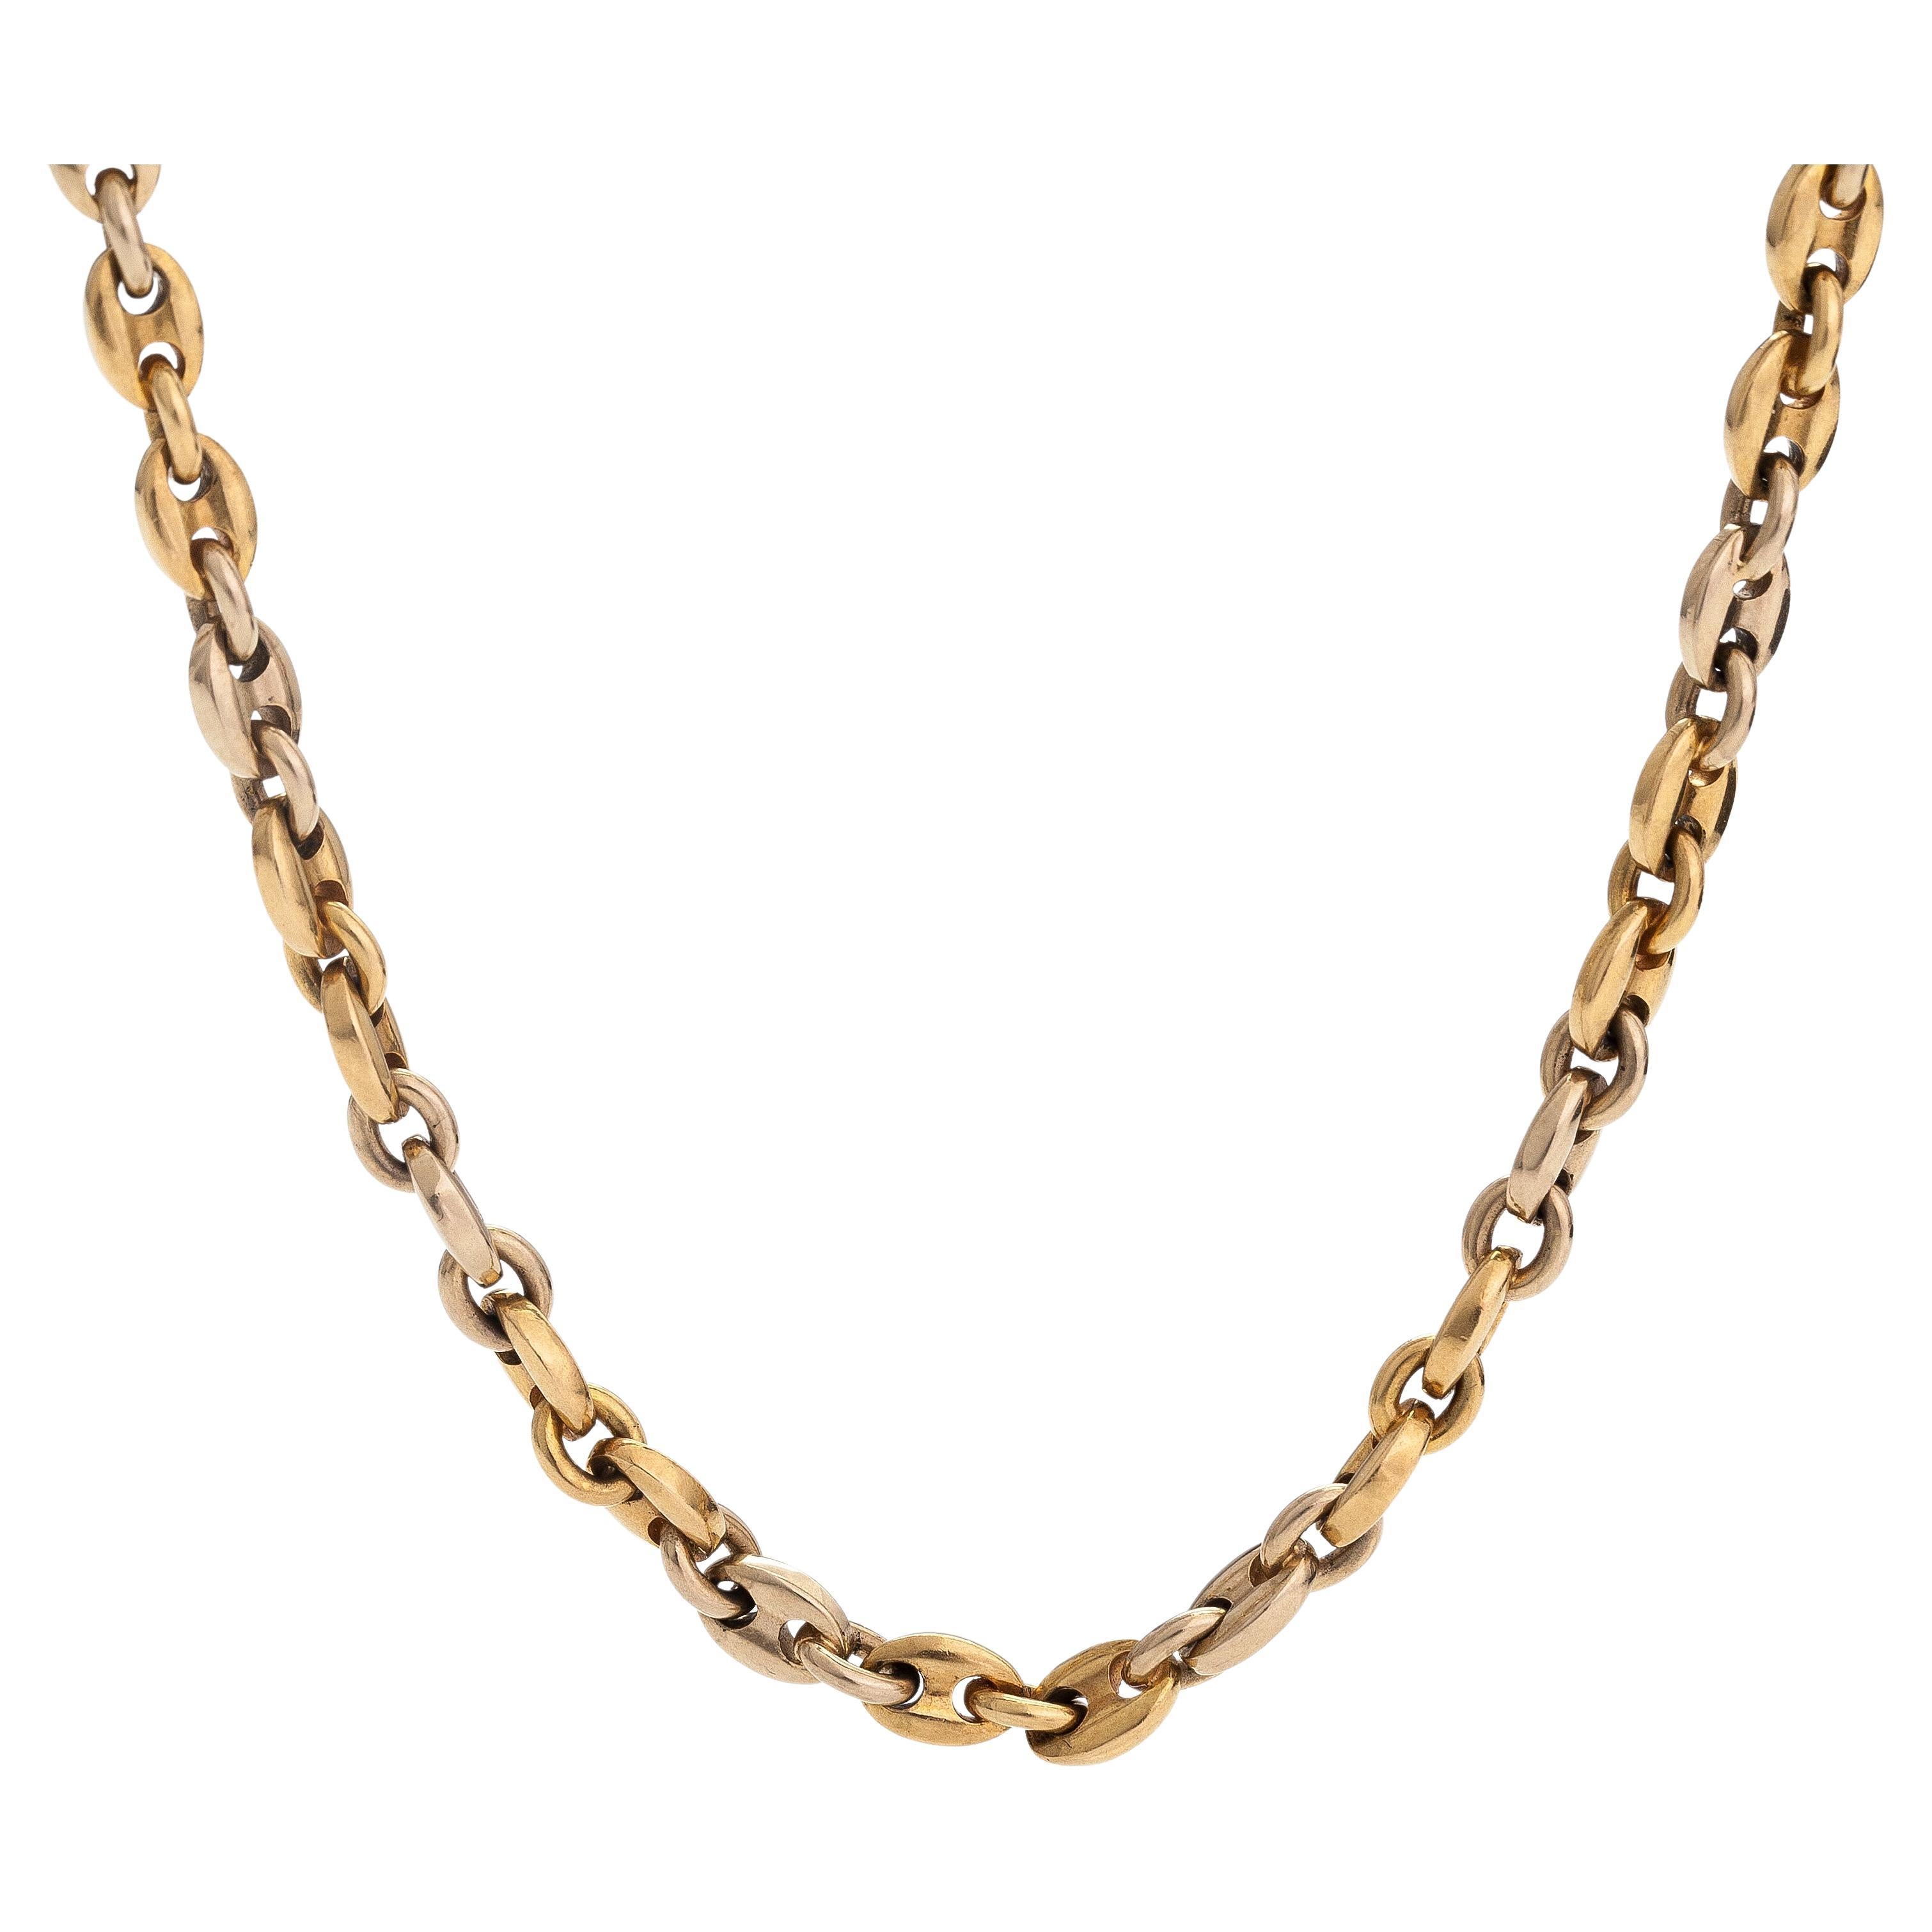 Elegant Vintage 18 Karat Yellow Gold Chain/Necklace by Cartier at 